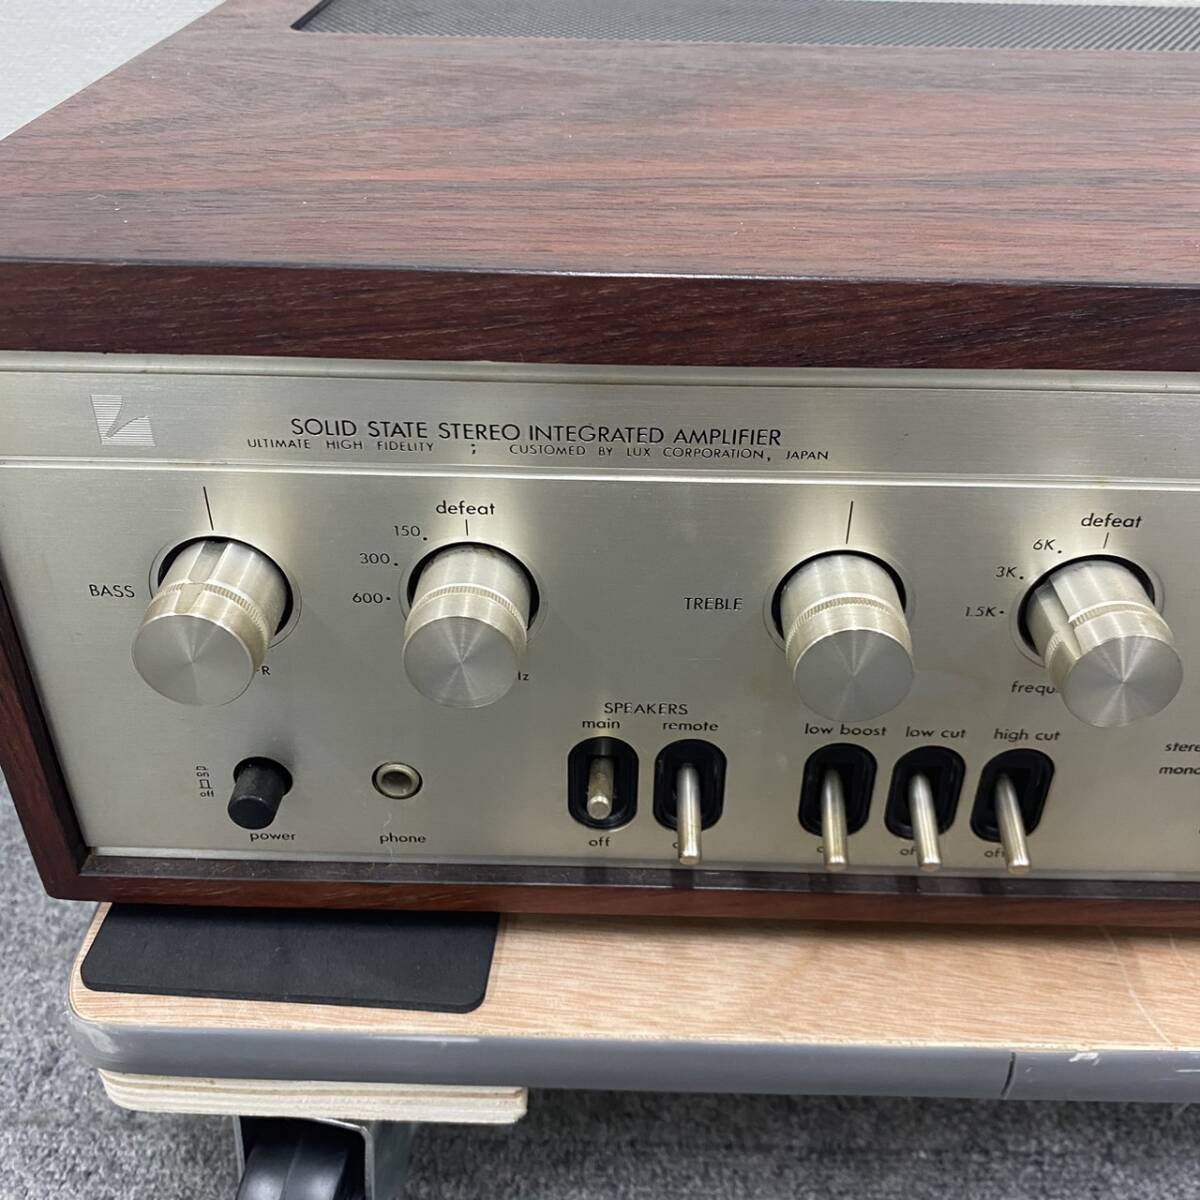 M230-Z14-283 LUXMAN Luxman L-505V stereo pre-main amplifier electrification has confirmed 26.5×45×15( approximately /.) audio equipment amplifier ②